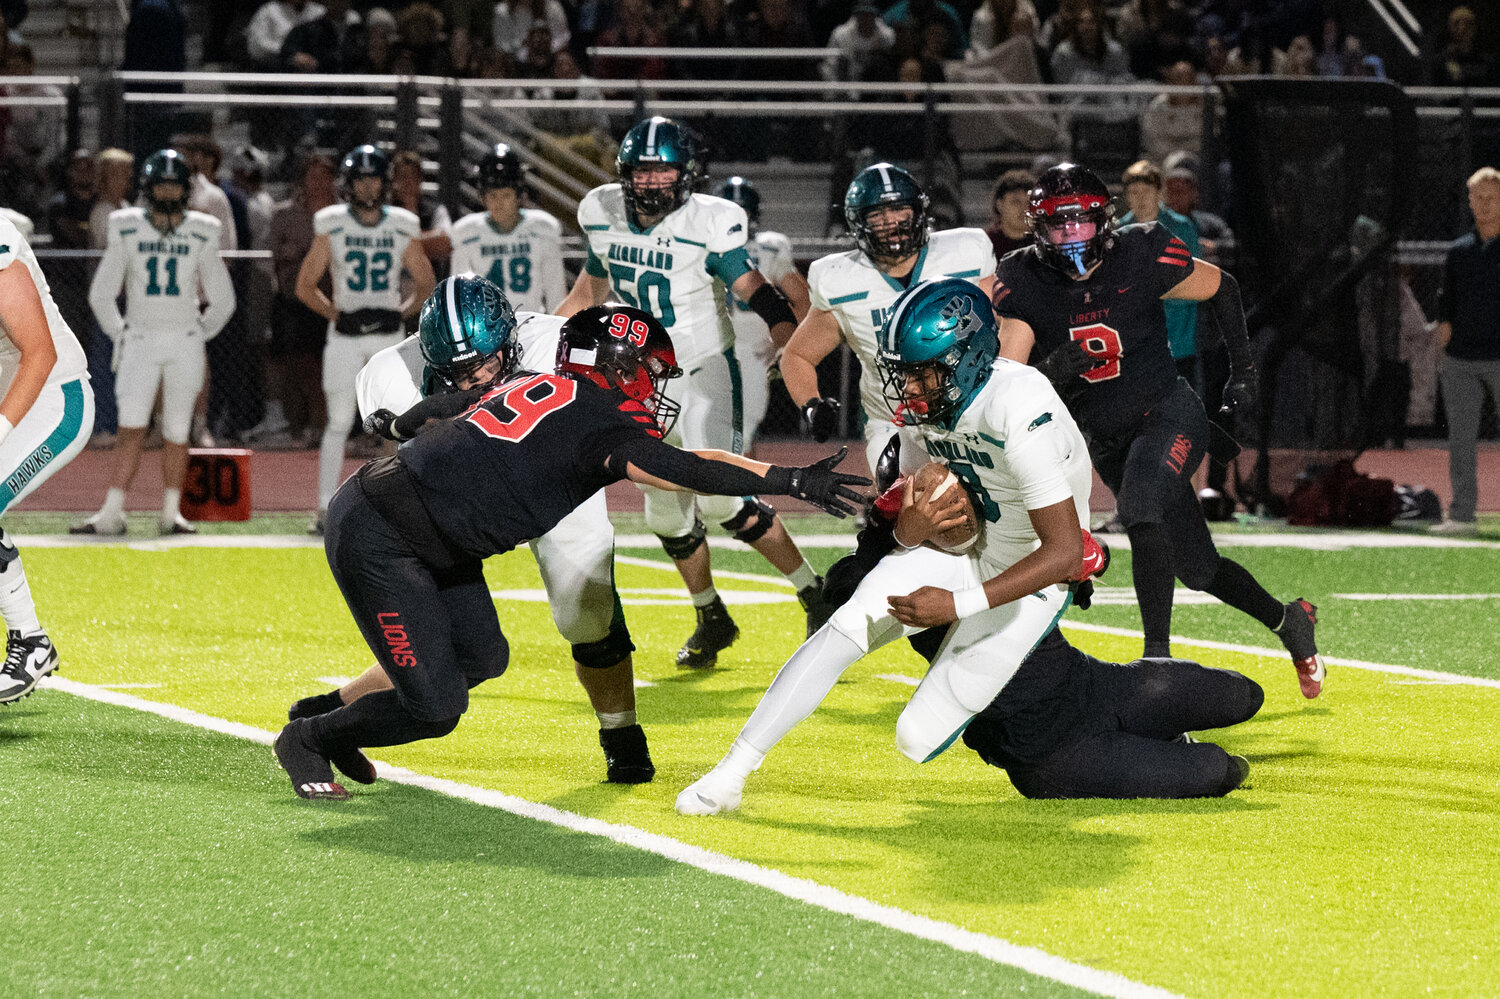 Liberty nose guard Ben Bryant (99) reaches for Highland wideout Crew Crandall (8) during the Lions' Open Semifinal victory on Saturday at Mountain Ridge High School. (Courtesy Picture Lady Photography for West Valley Preps)